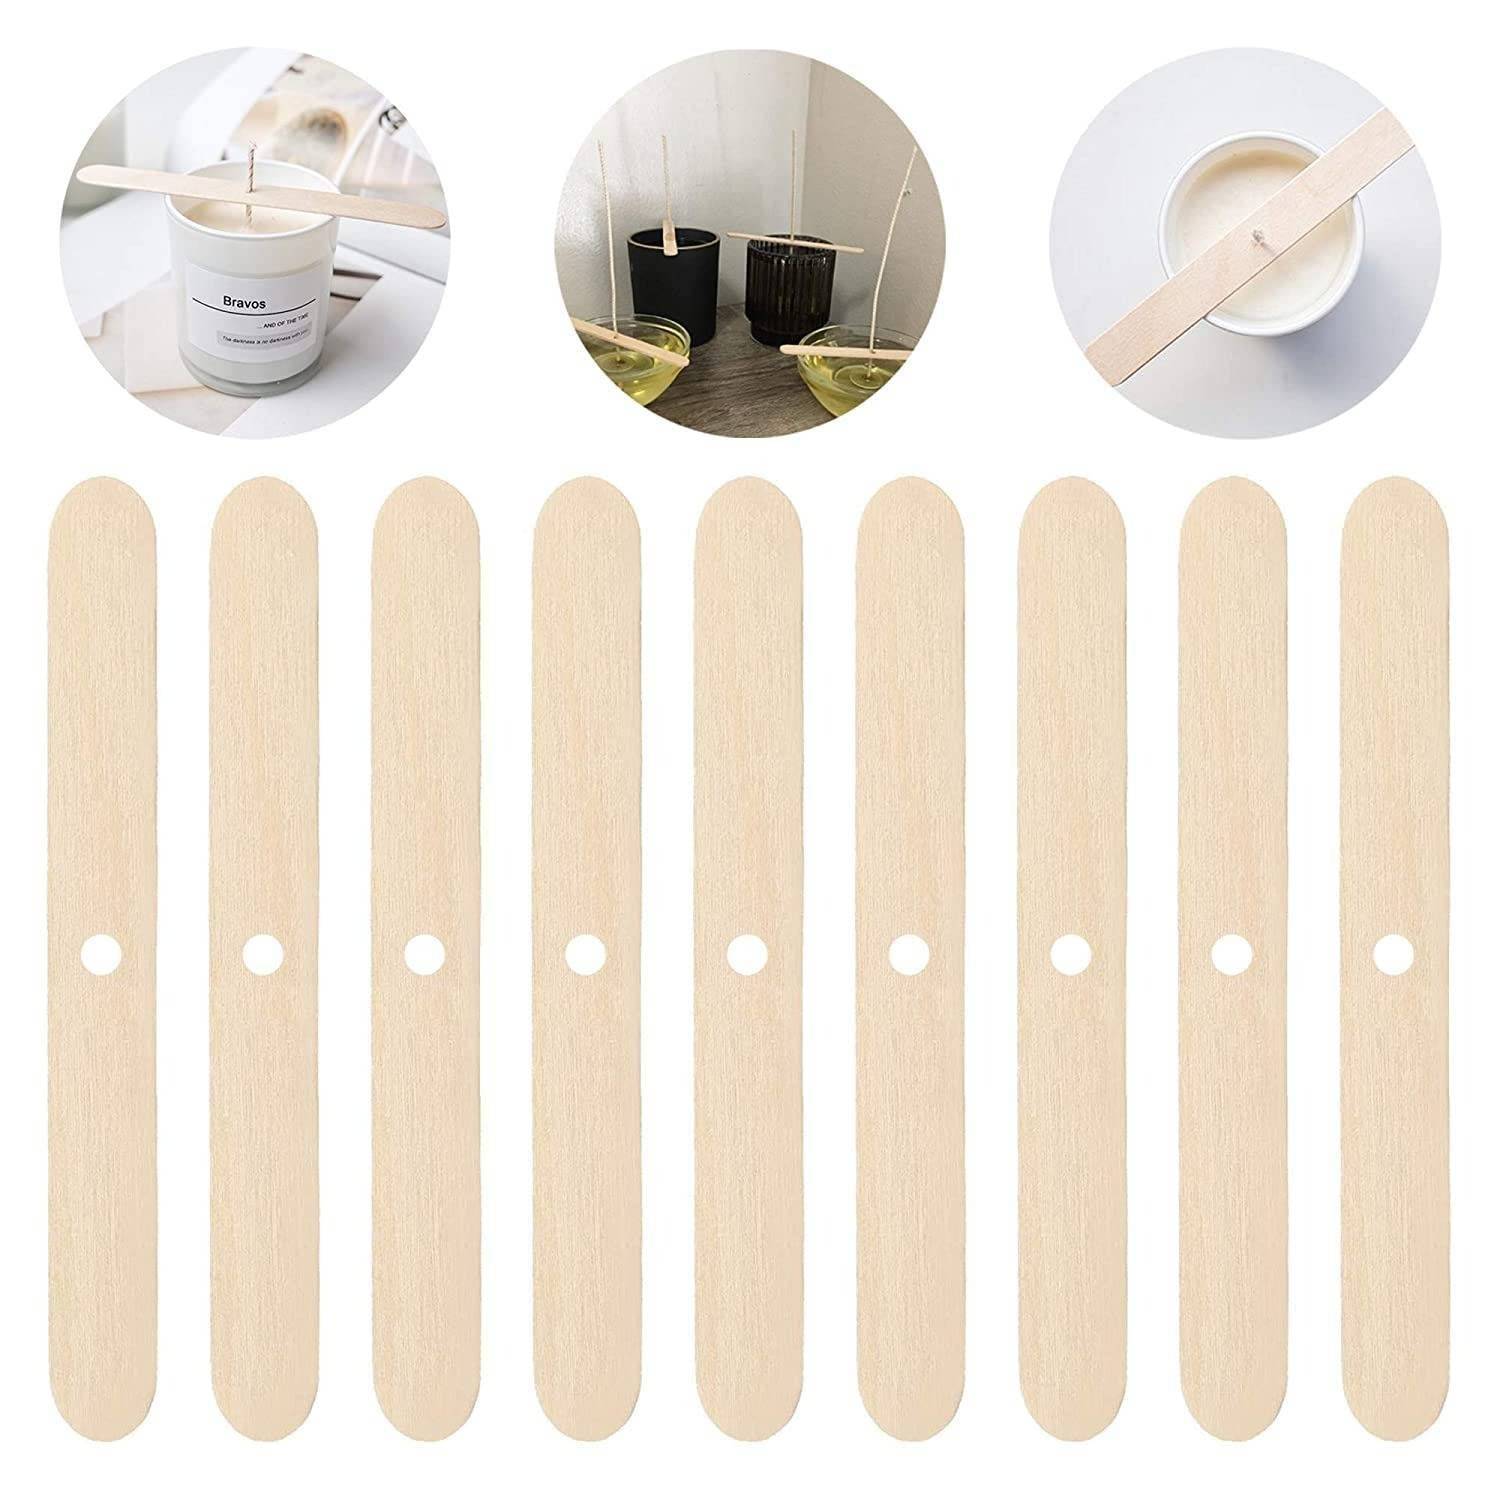 10Pcs 7 Holes Wooden Candle Wick Holders Candle Wick Centering